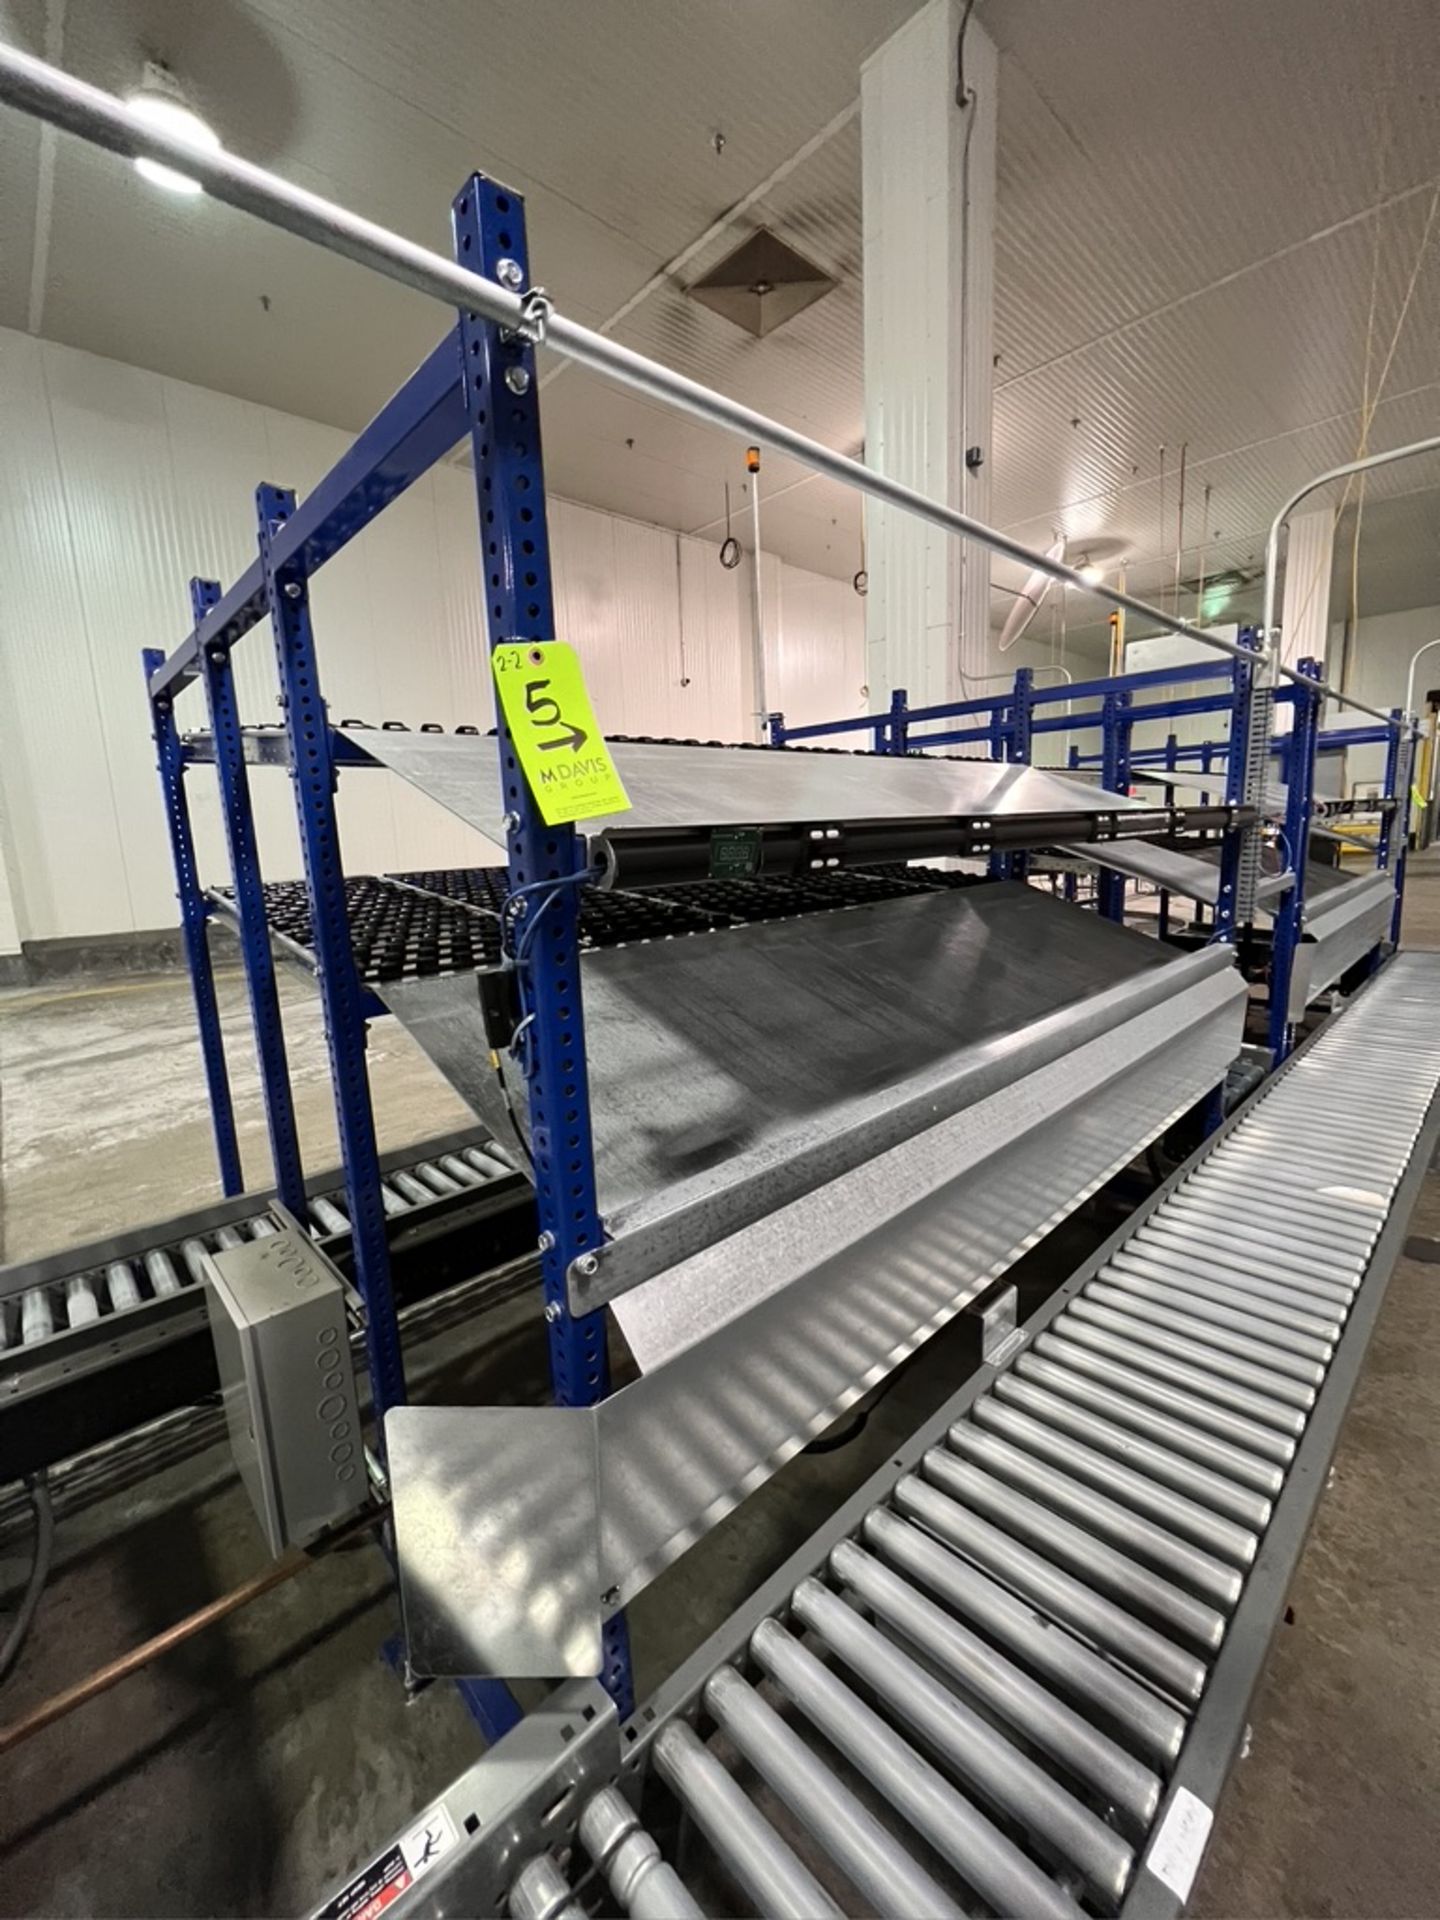 (2) UNEX SPAN TRACK PRODUCT PACK-OFF RACKS, WITH ROLLER CONVEYOR, INCLUDES SINGLE DOOR CONTROL PANEL - Image 6 of 18